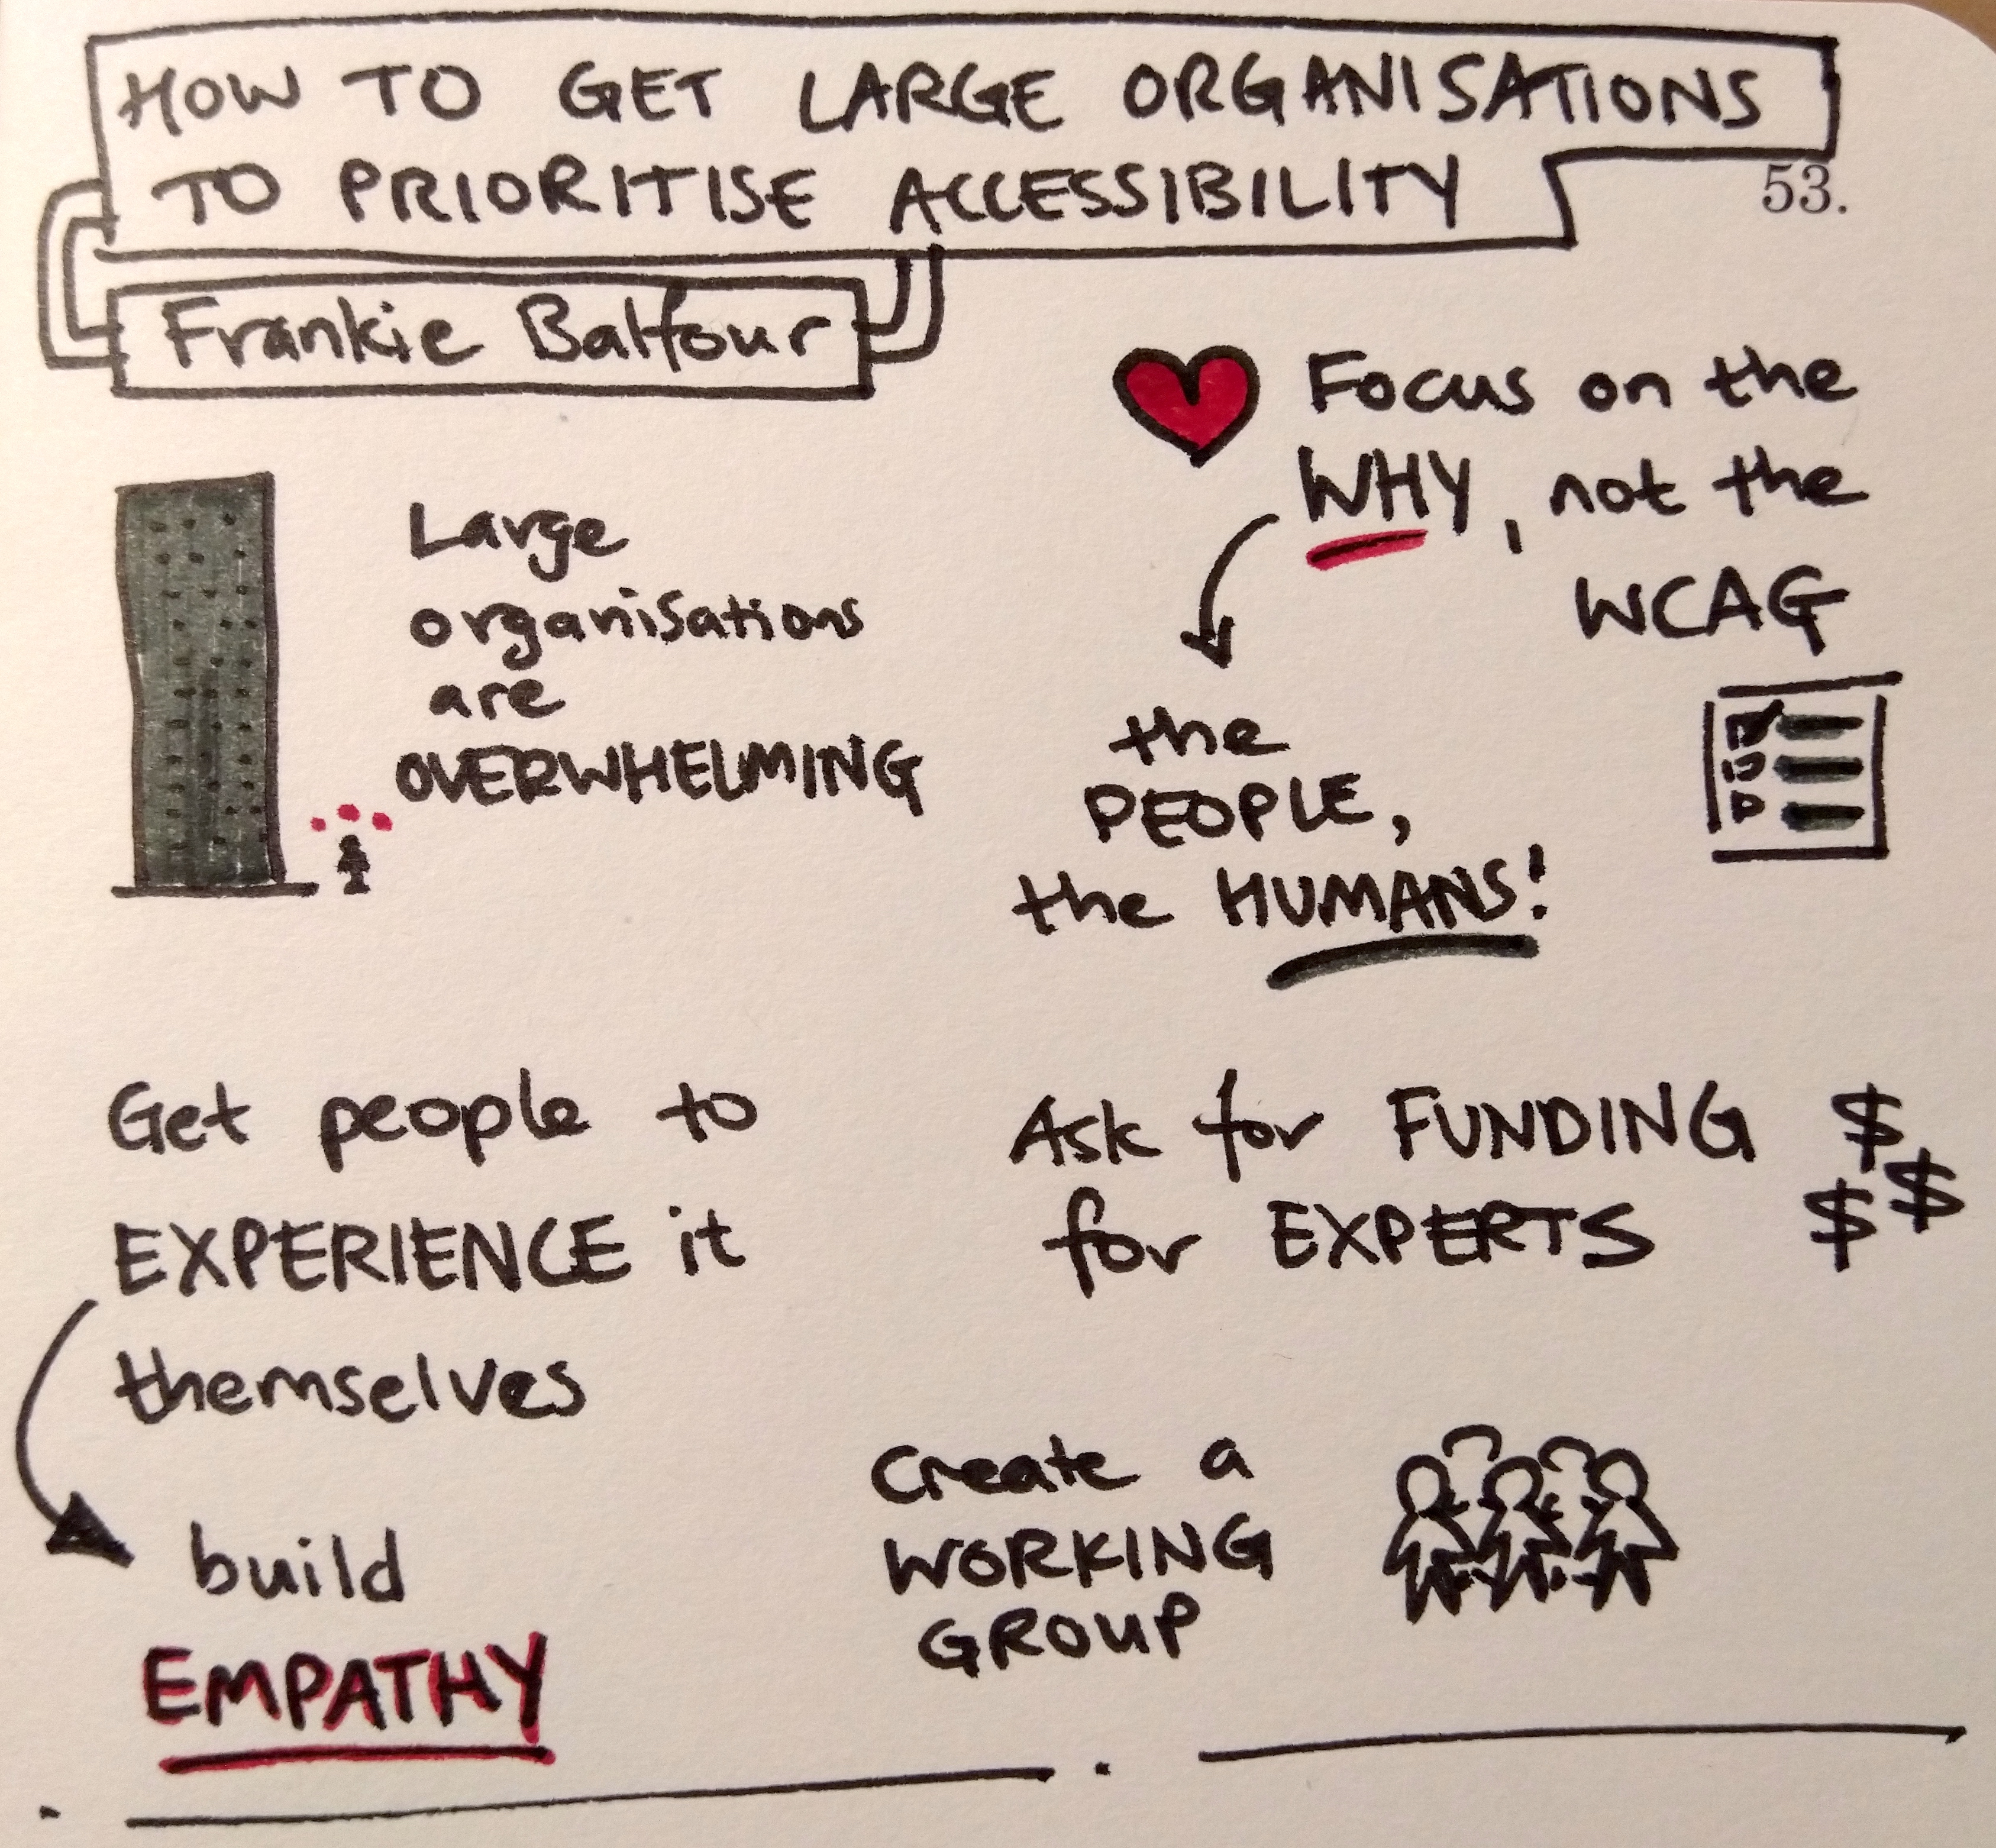 Sketchnotes for Frankie Balfour - How to get large organisations to prioritise accessibility